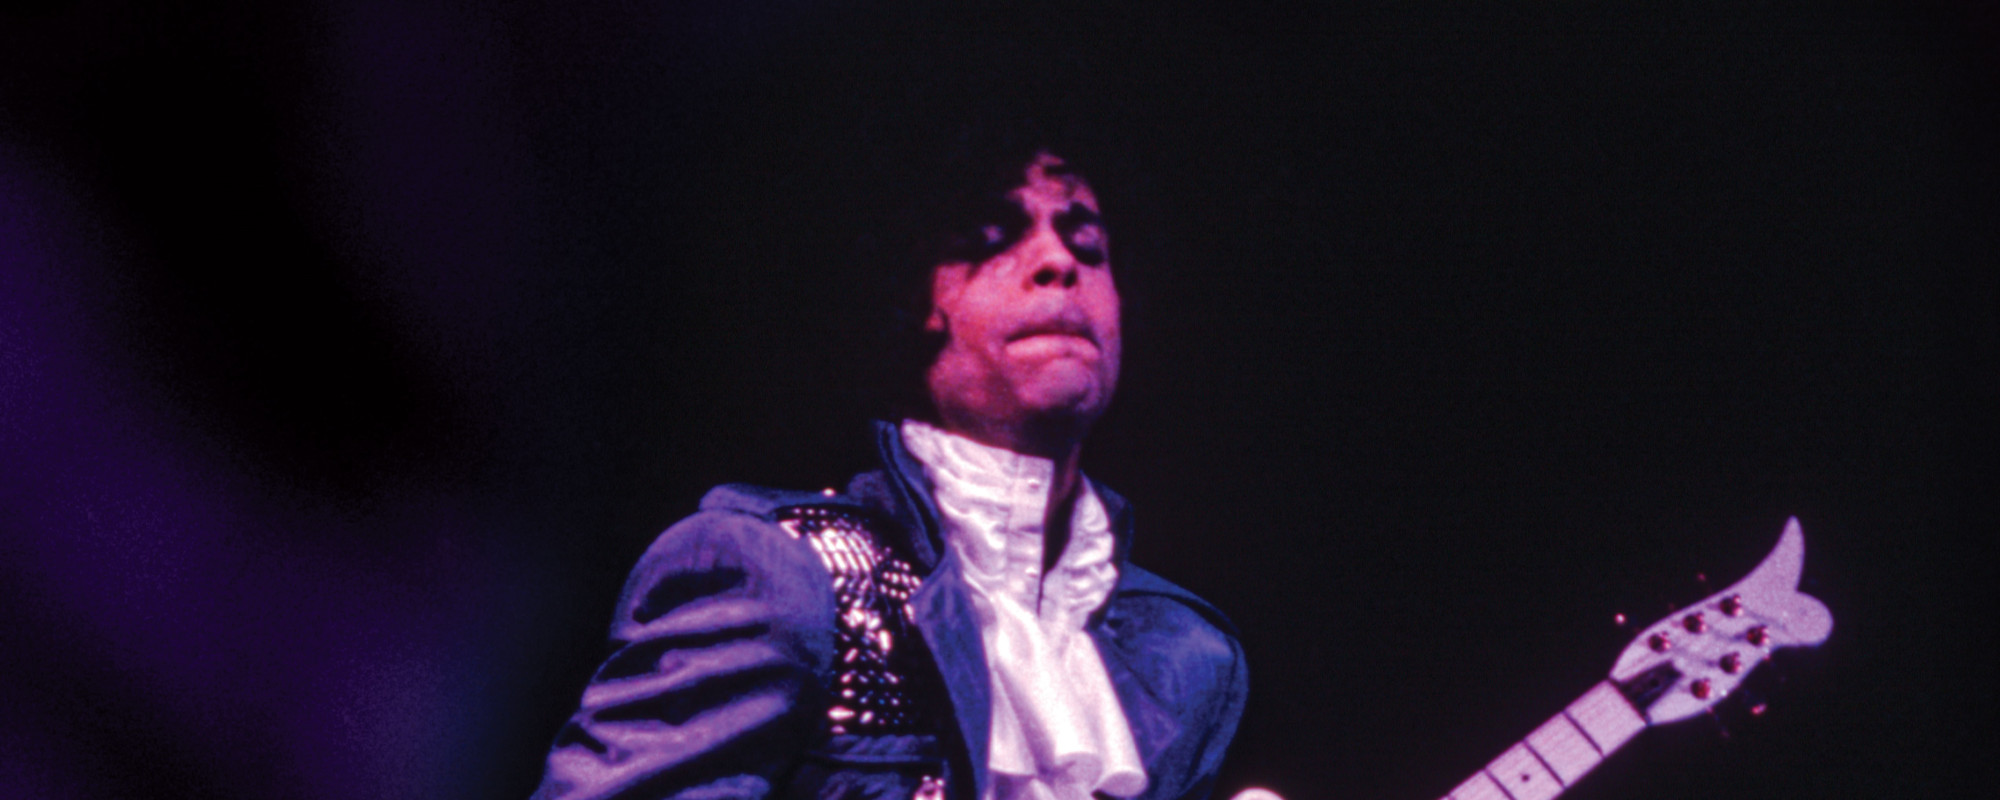 Review: Prince Pulls Out All the Stops in This Enhanced Reissue of the 1985 ‘Purple Rain’ Tour